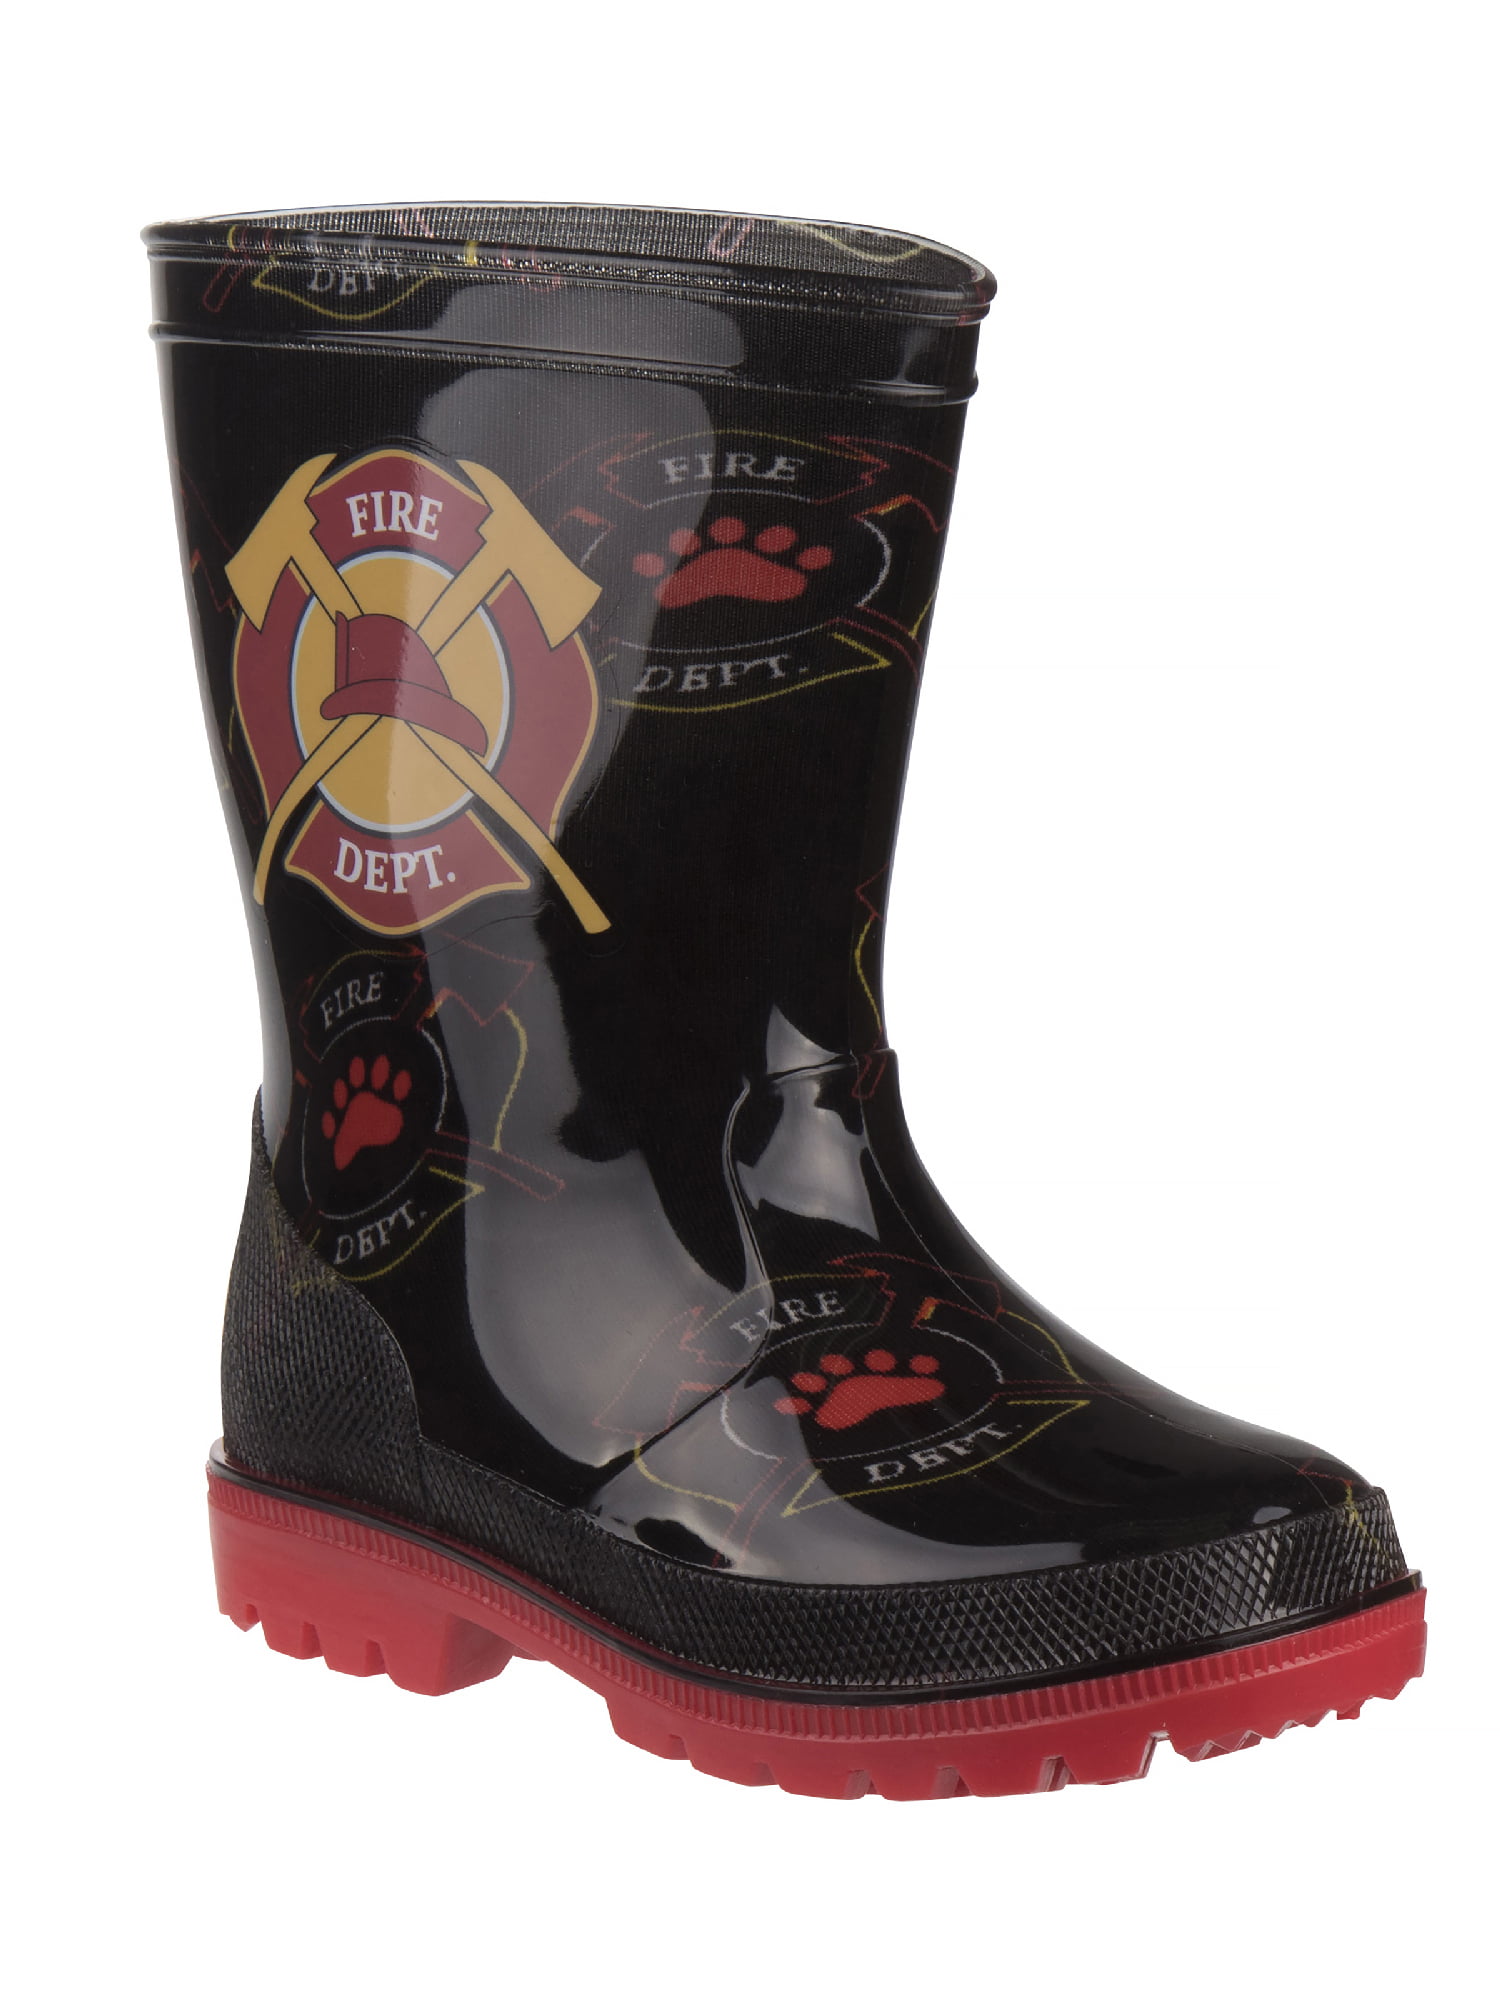 New Boys EC19 Spider Web Jelly Round Toe Pull On Rain Boot Size 5-10 